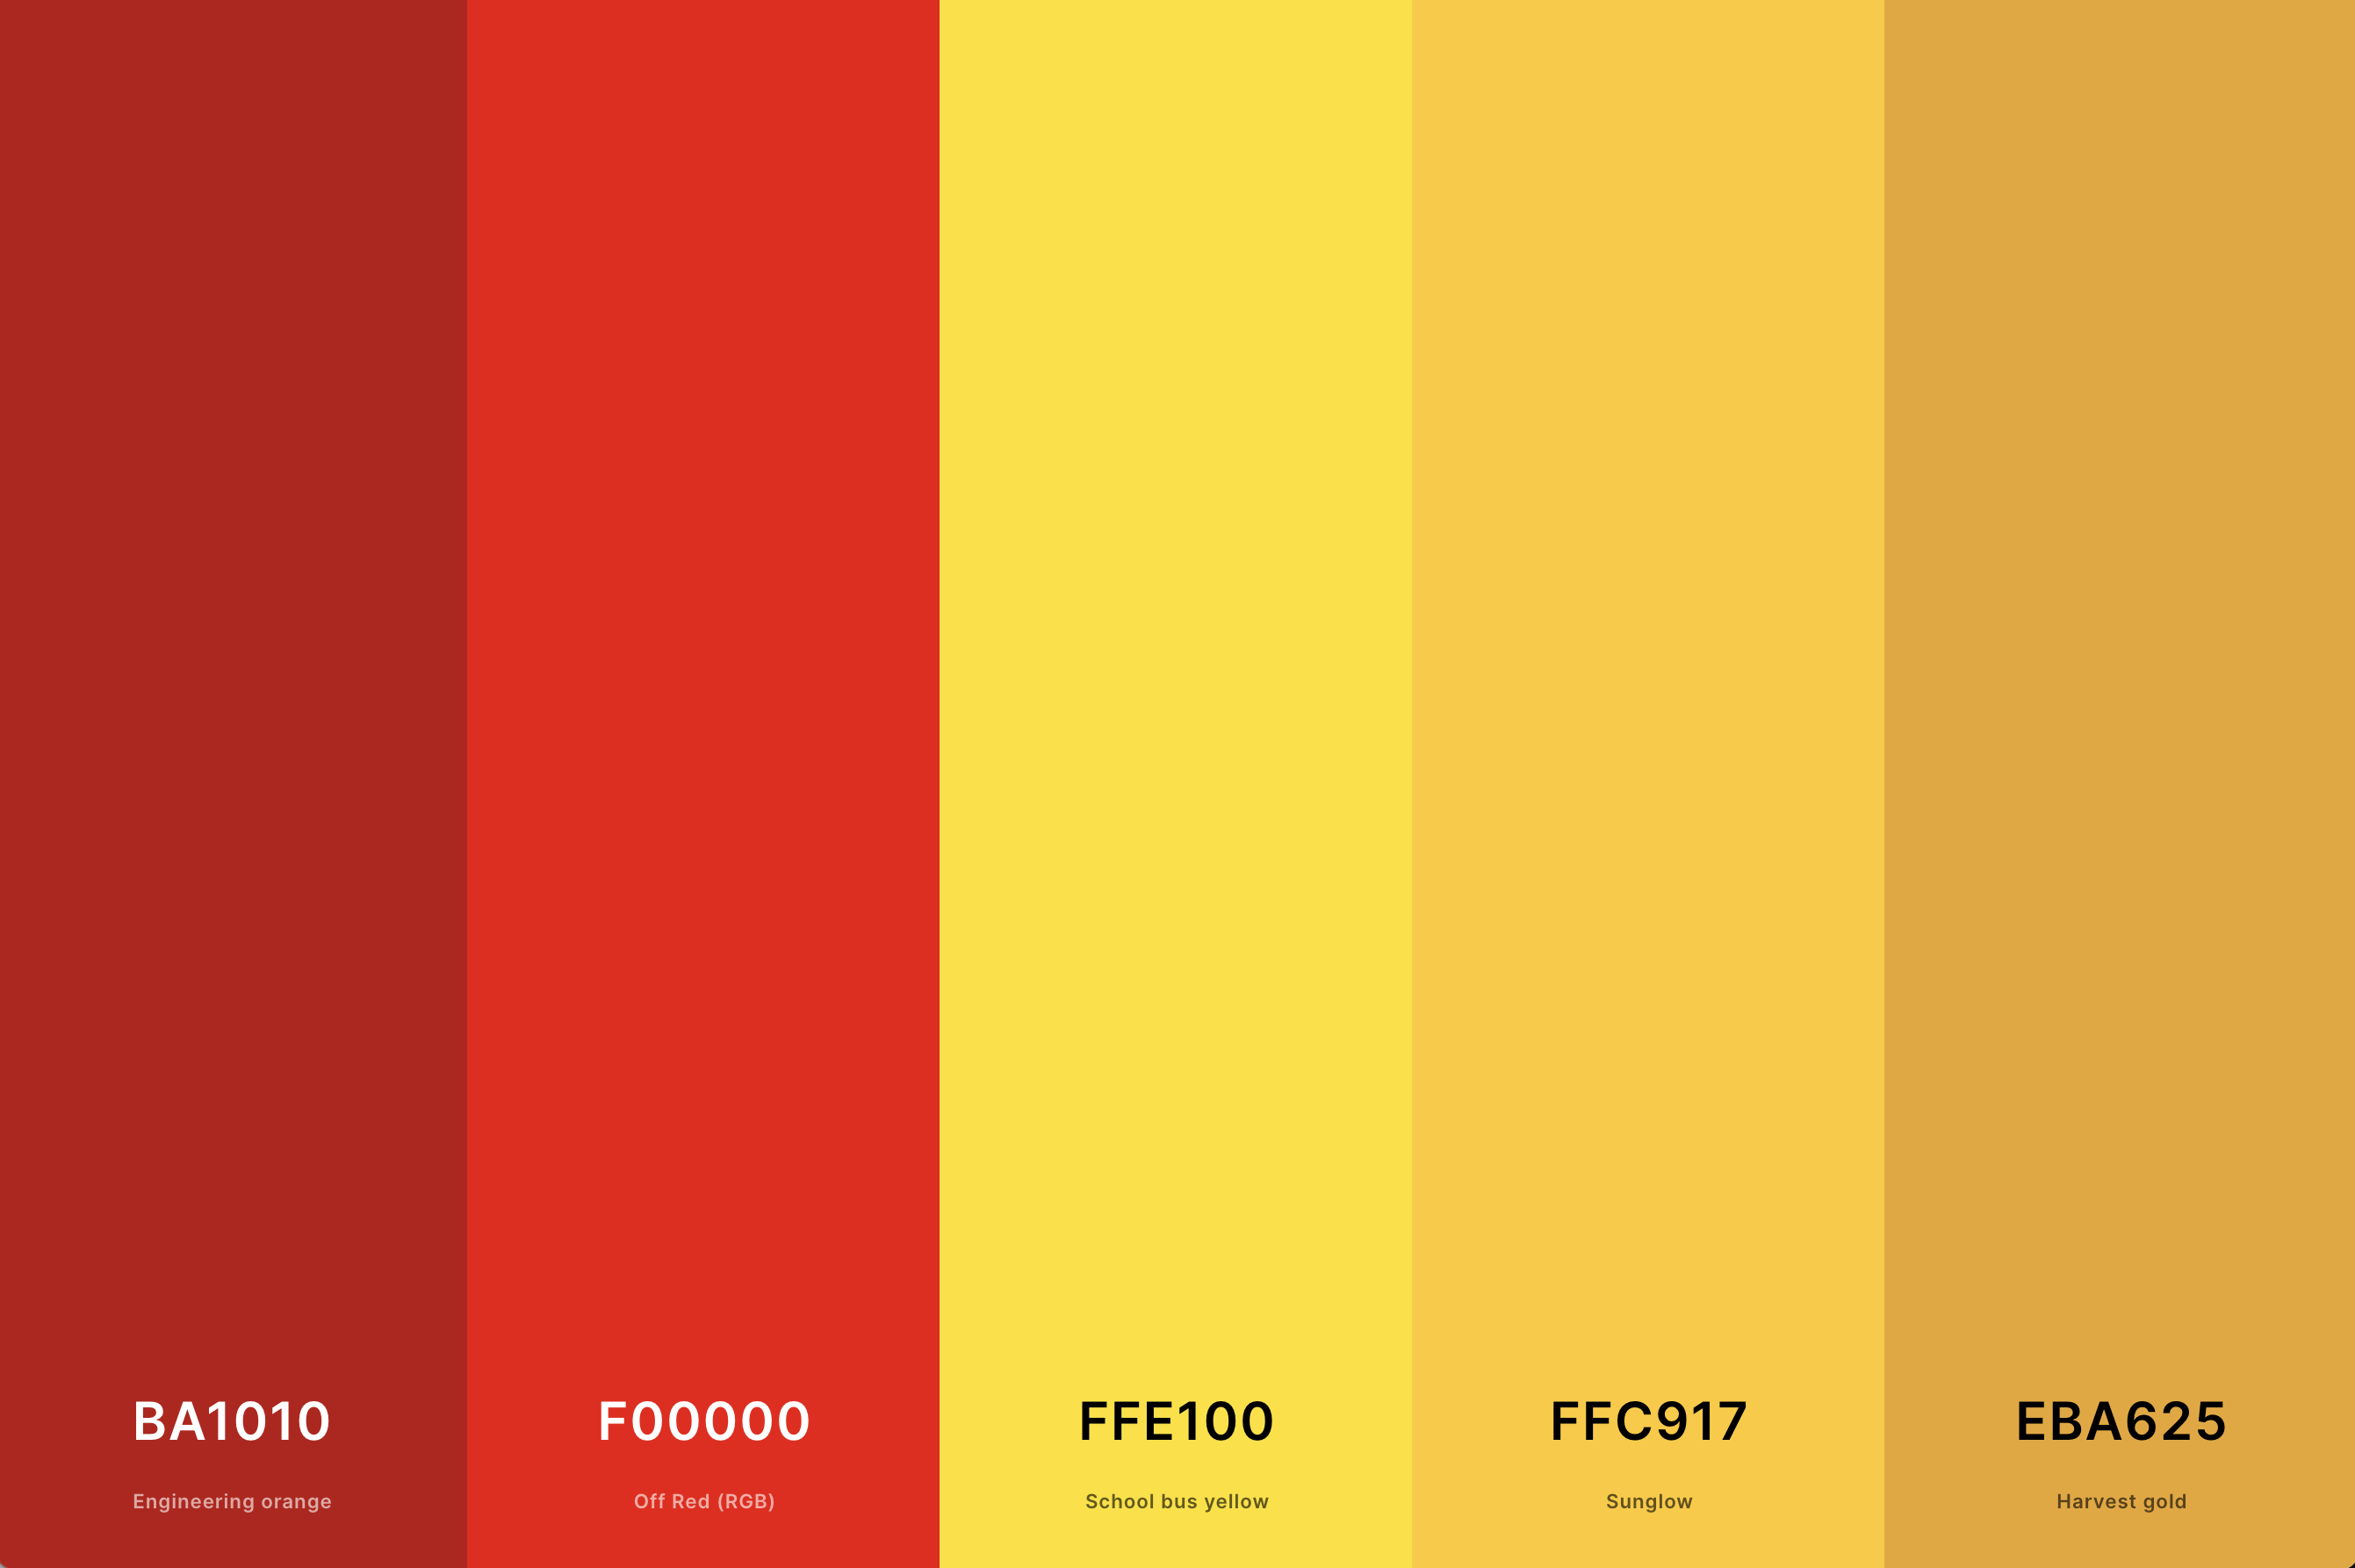 7. Red And Gold Color Palette Color Palette with Engineering Orange (Hex #BA1010) + Off Red (Rgb) (Hex #F00000) + School Bus Yellow (Hex #FFE100) + Sunglow (Hex #FFC917) + Harvest Gold (Hex #EBA625) Color Palette with Hex Codes